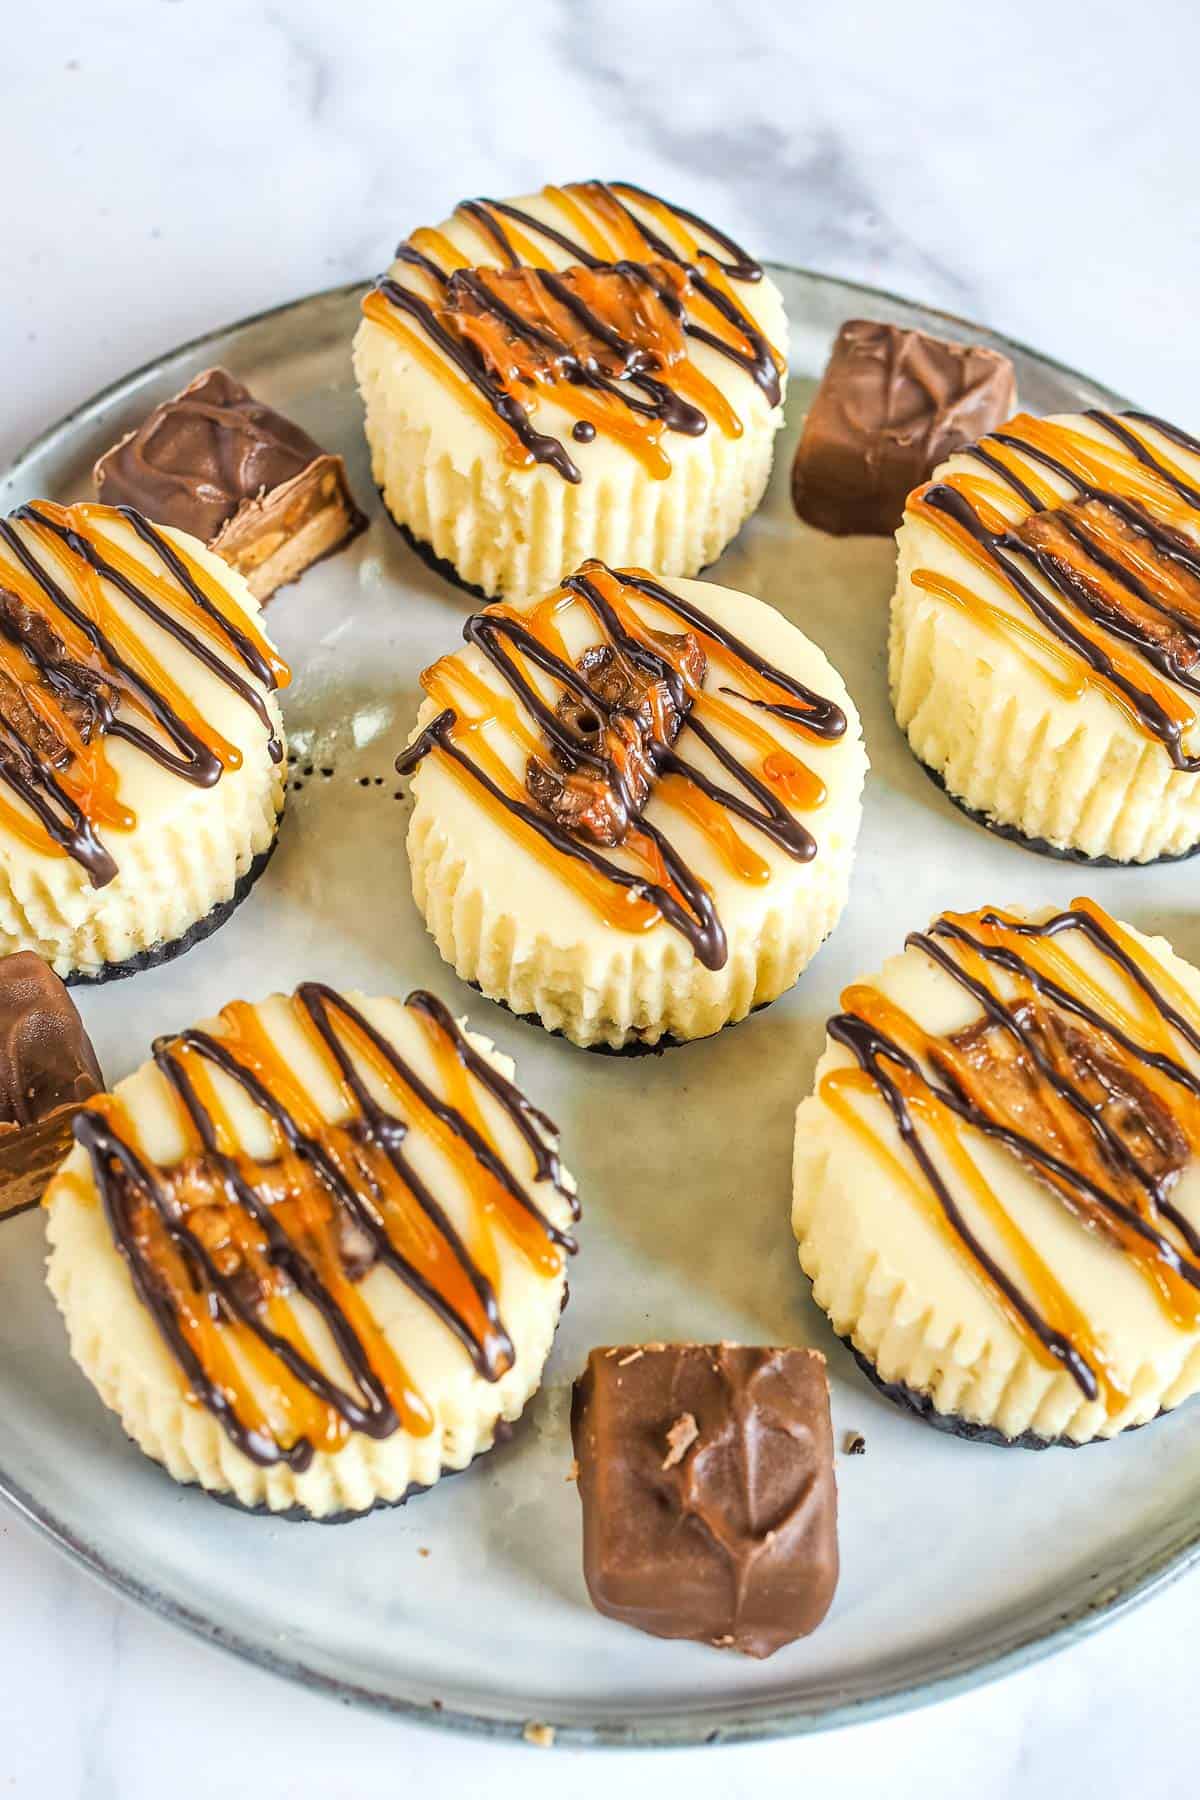 6 mini cheesecakes decorated with Snickers chocolate and chocolate and caramel drizzles on a grey plate.